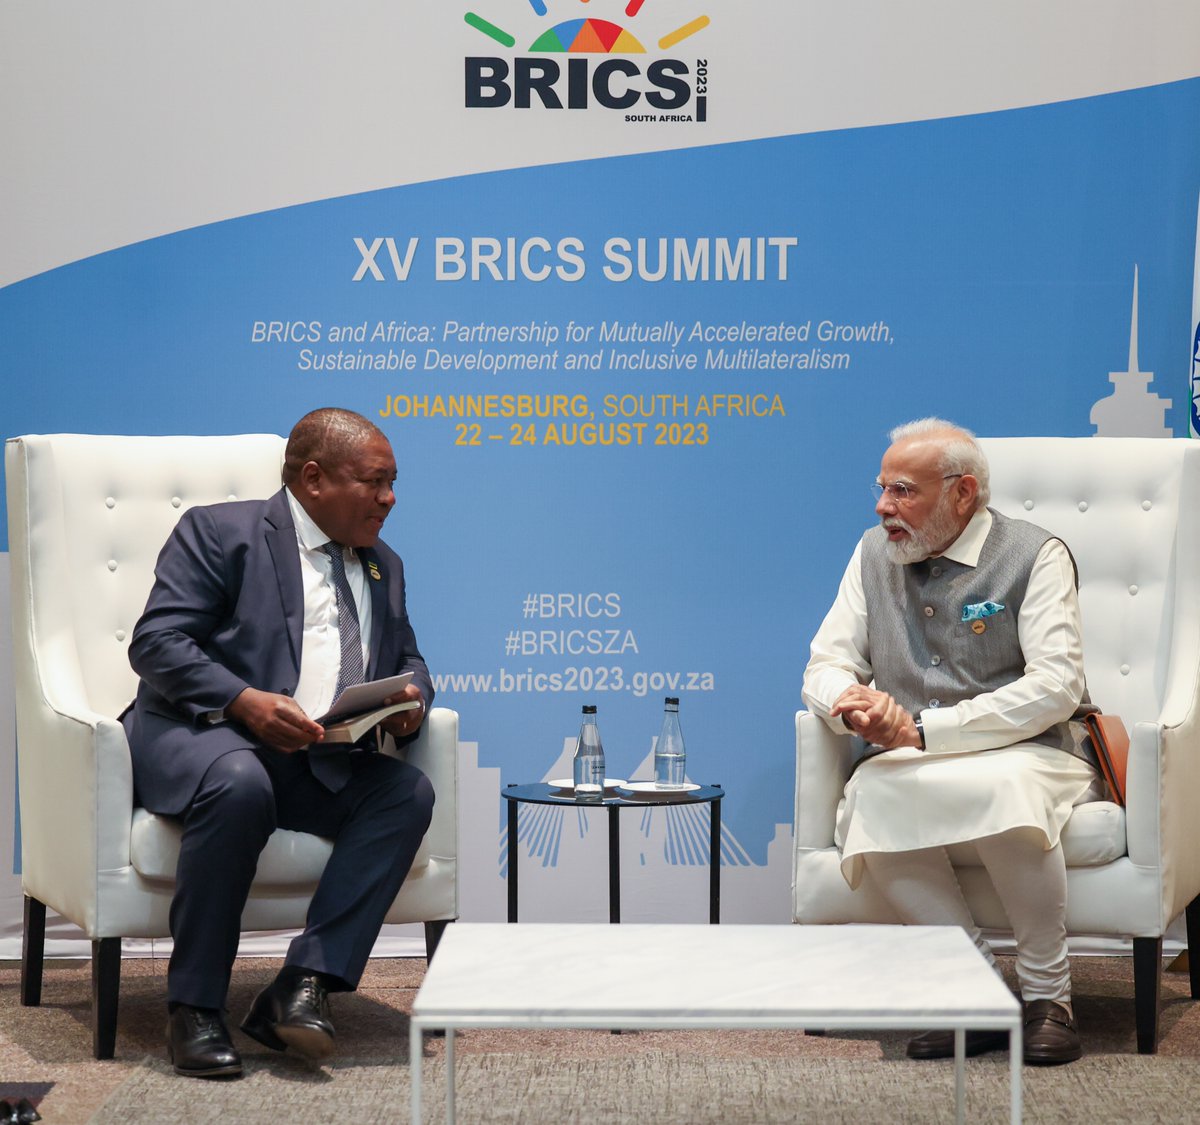 Met President Filipe Nyusi on the sidelines of the BRICS Summit in Johannesburg. We discussed ways to diversify India-Mozambique cooperation across various sectors for the benefit of the people of our nations.